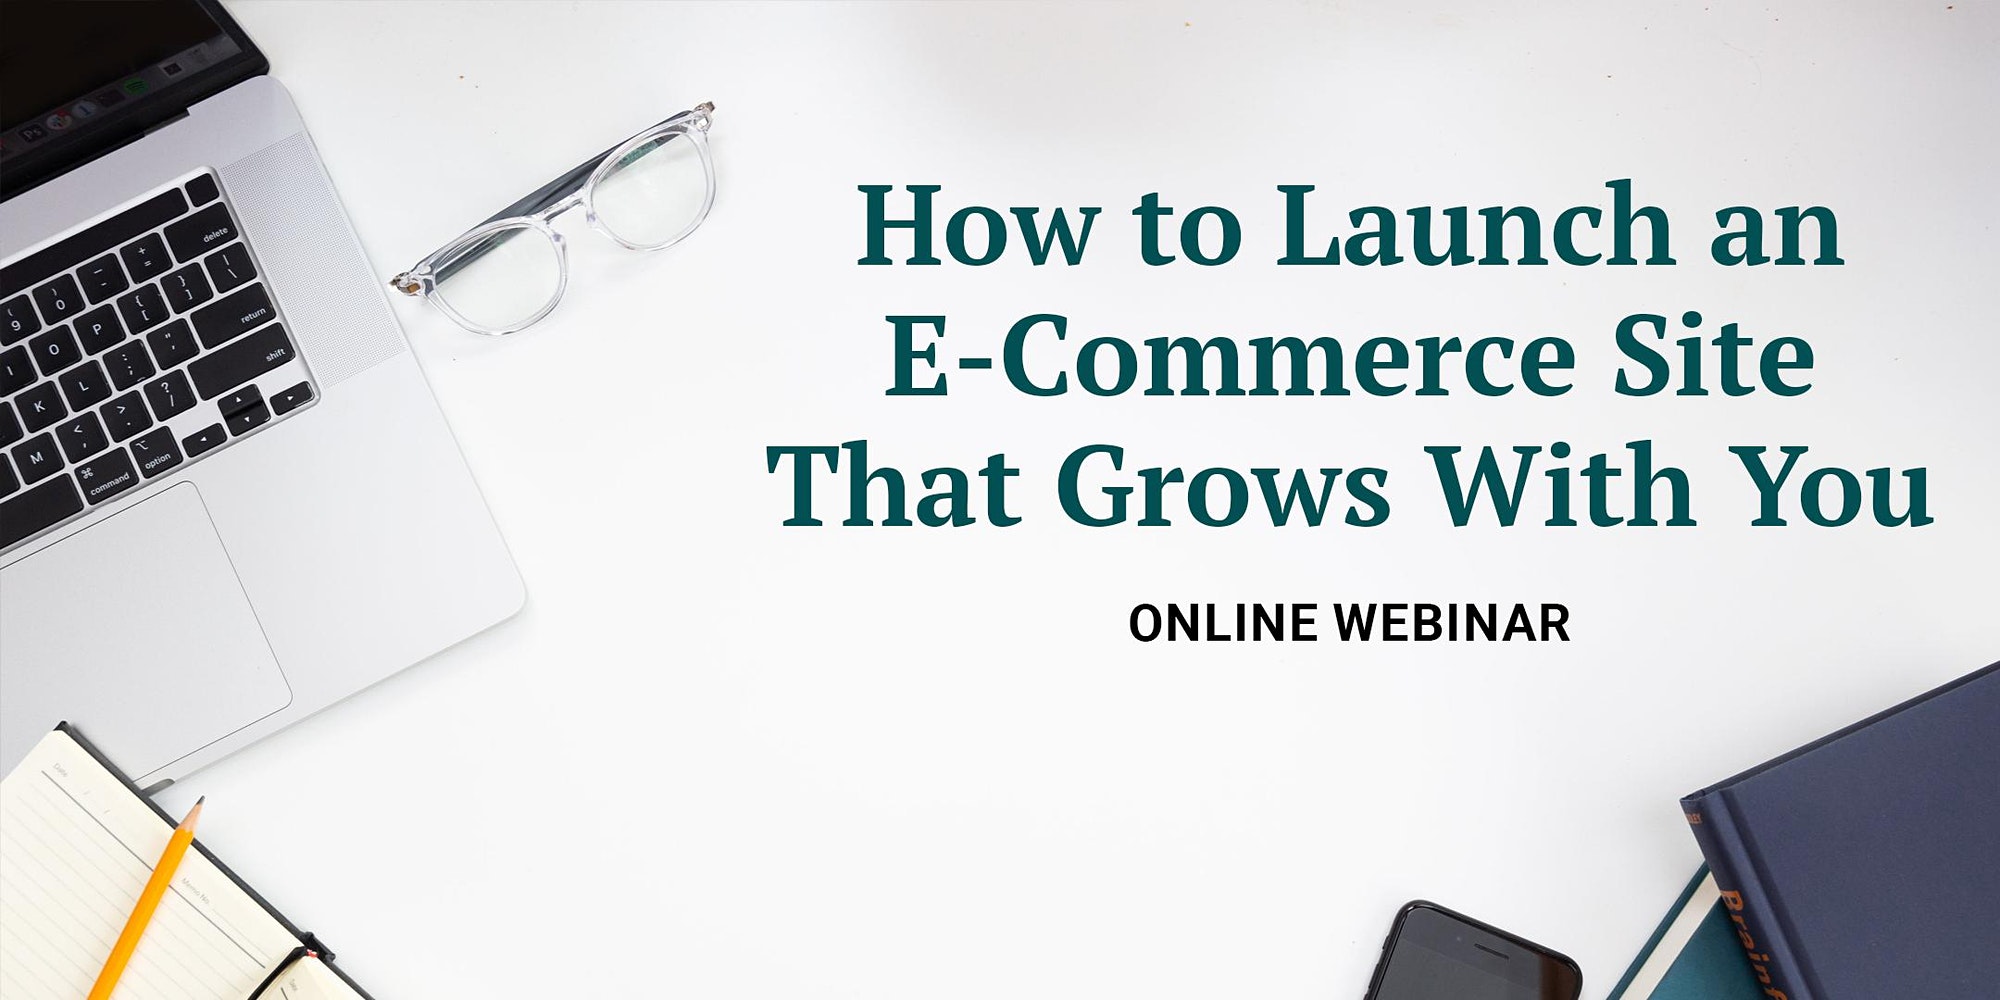 How to launch an e-commerce site that grows with you: Online webinar